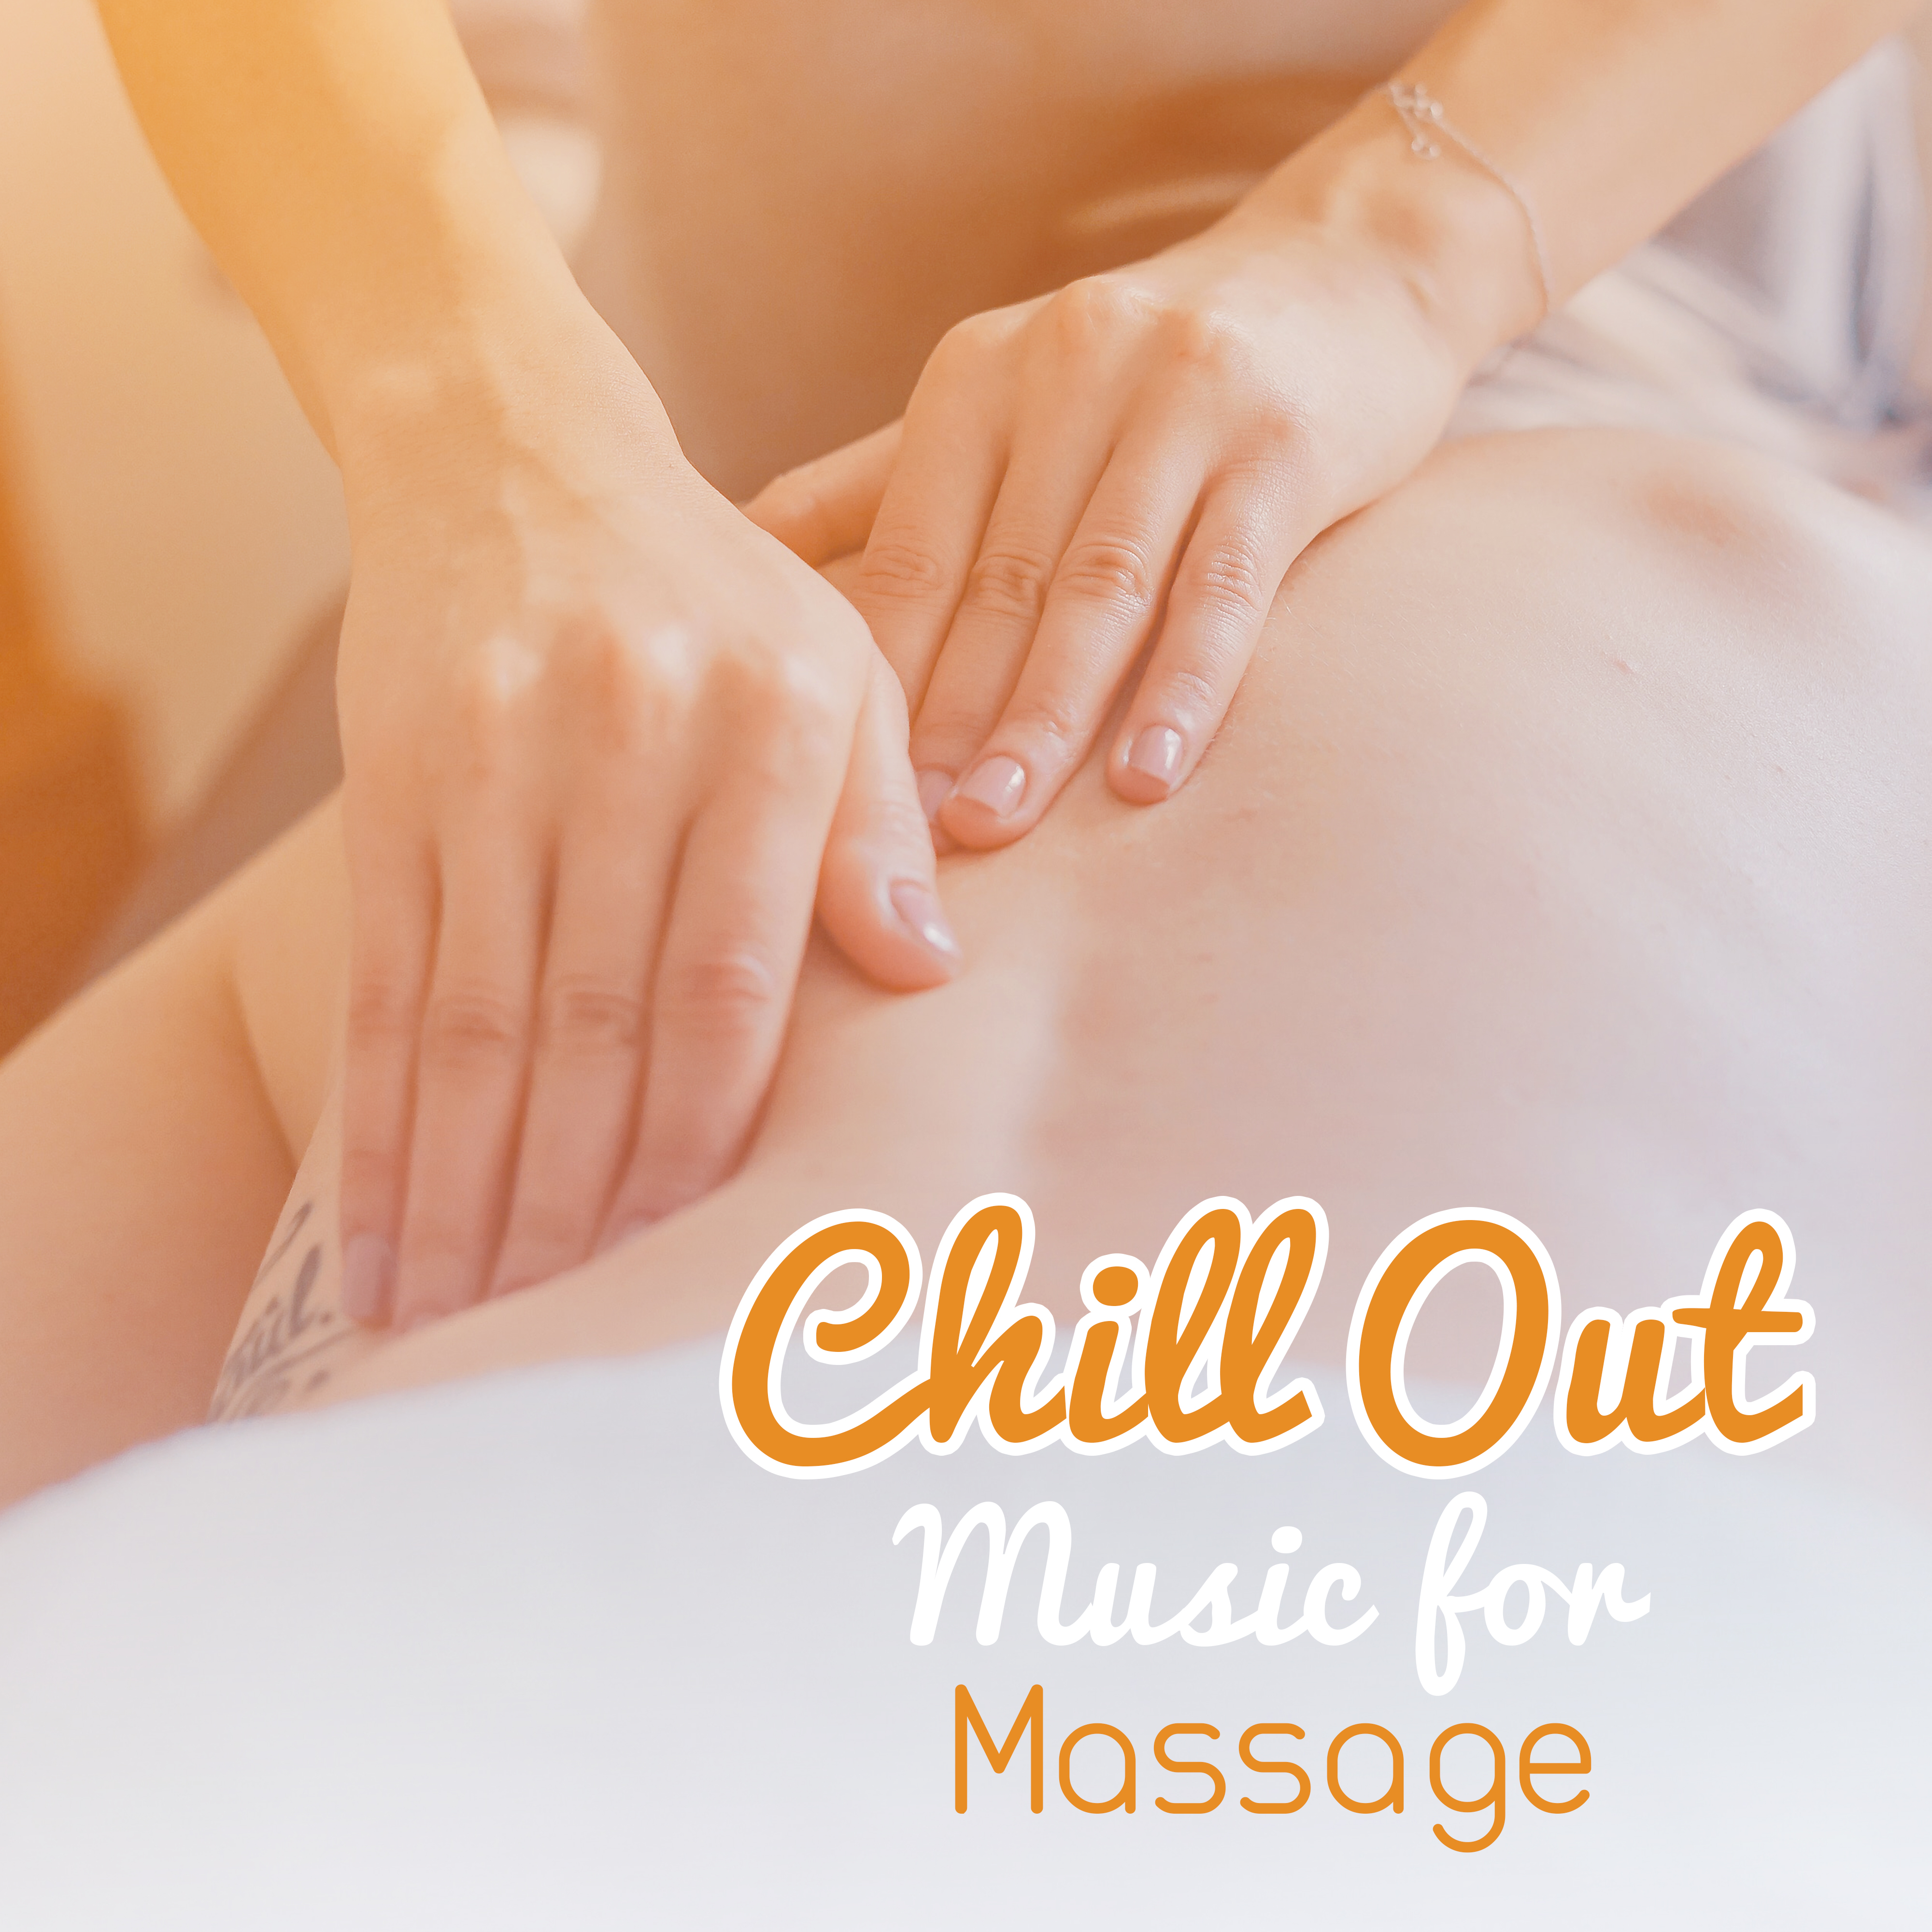 Chill Out Music for Massage